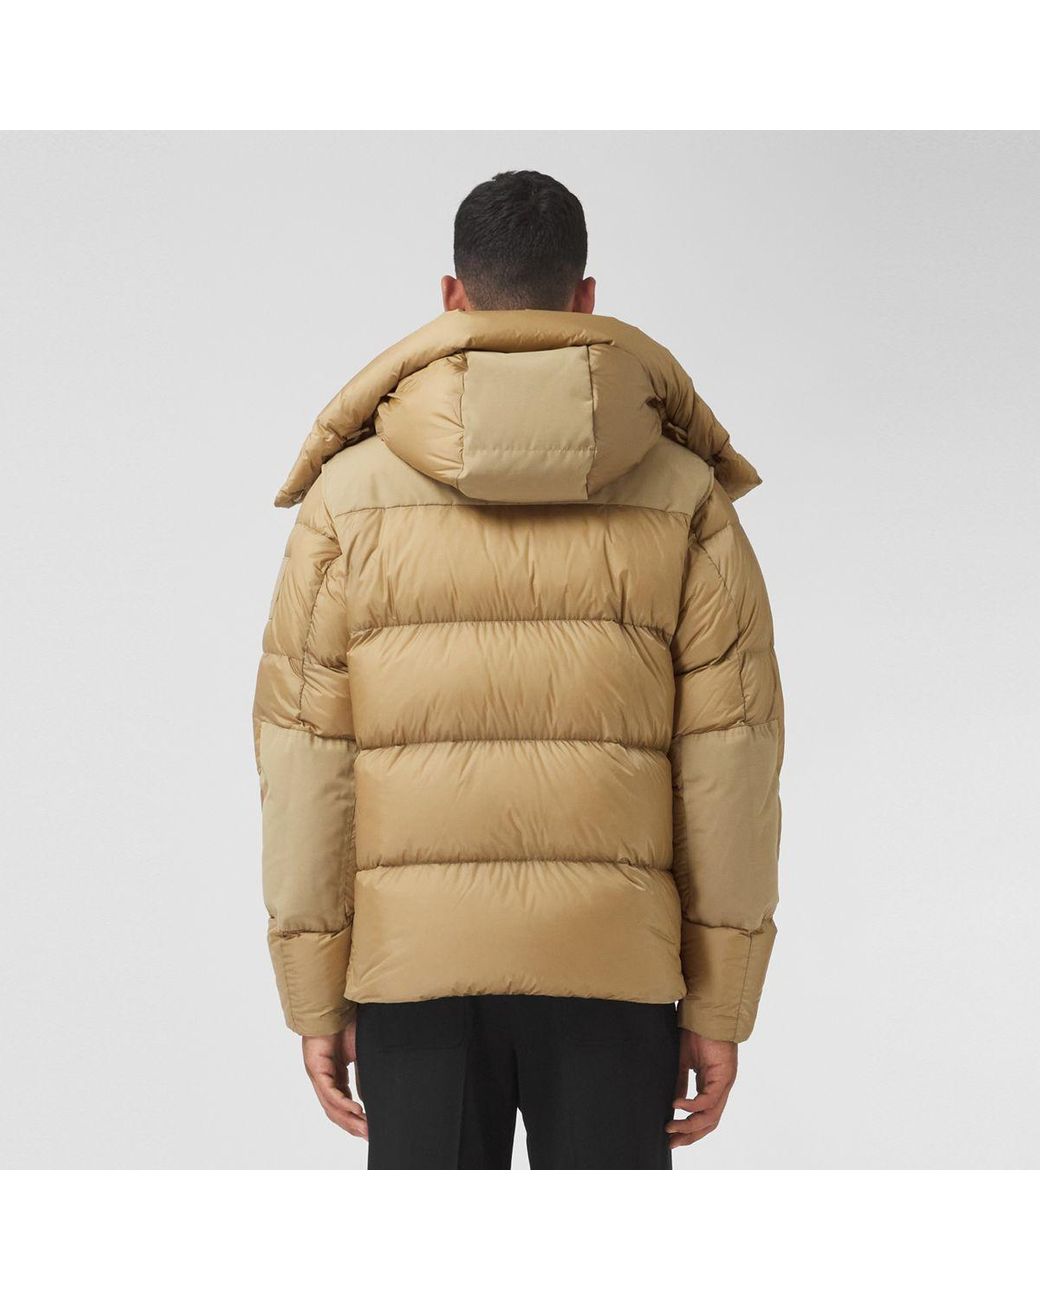 Burberry Synthetic Detachable Sleeve Hooded Puffer Jacket for Men - Lyst